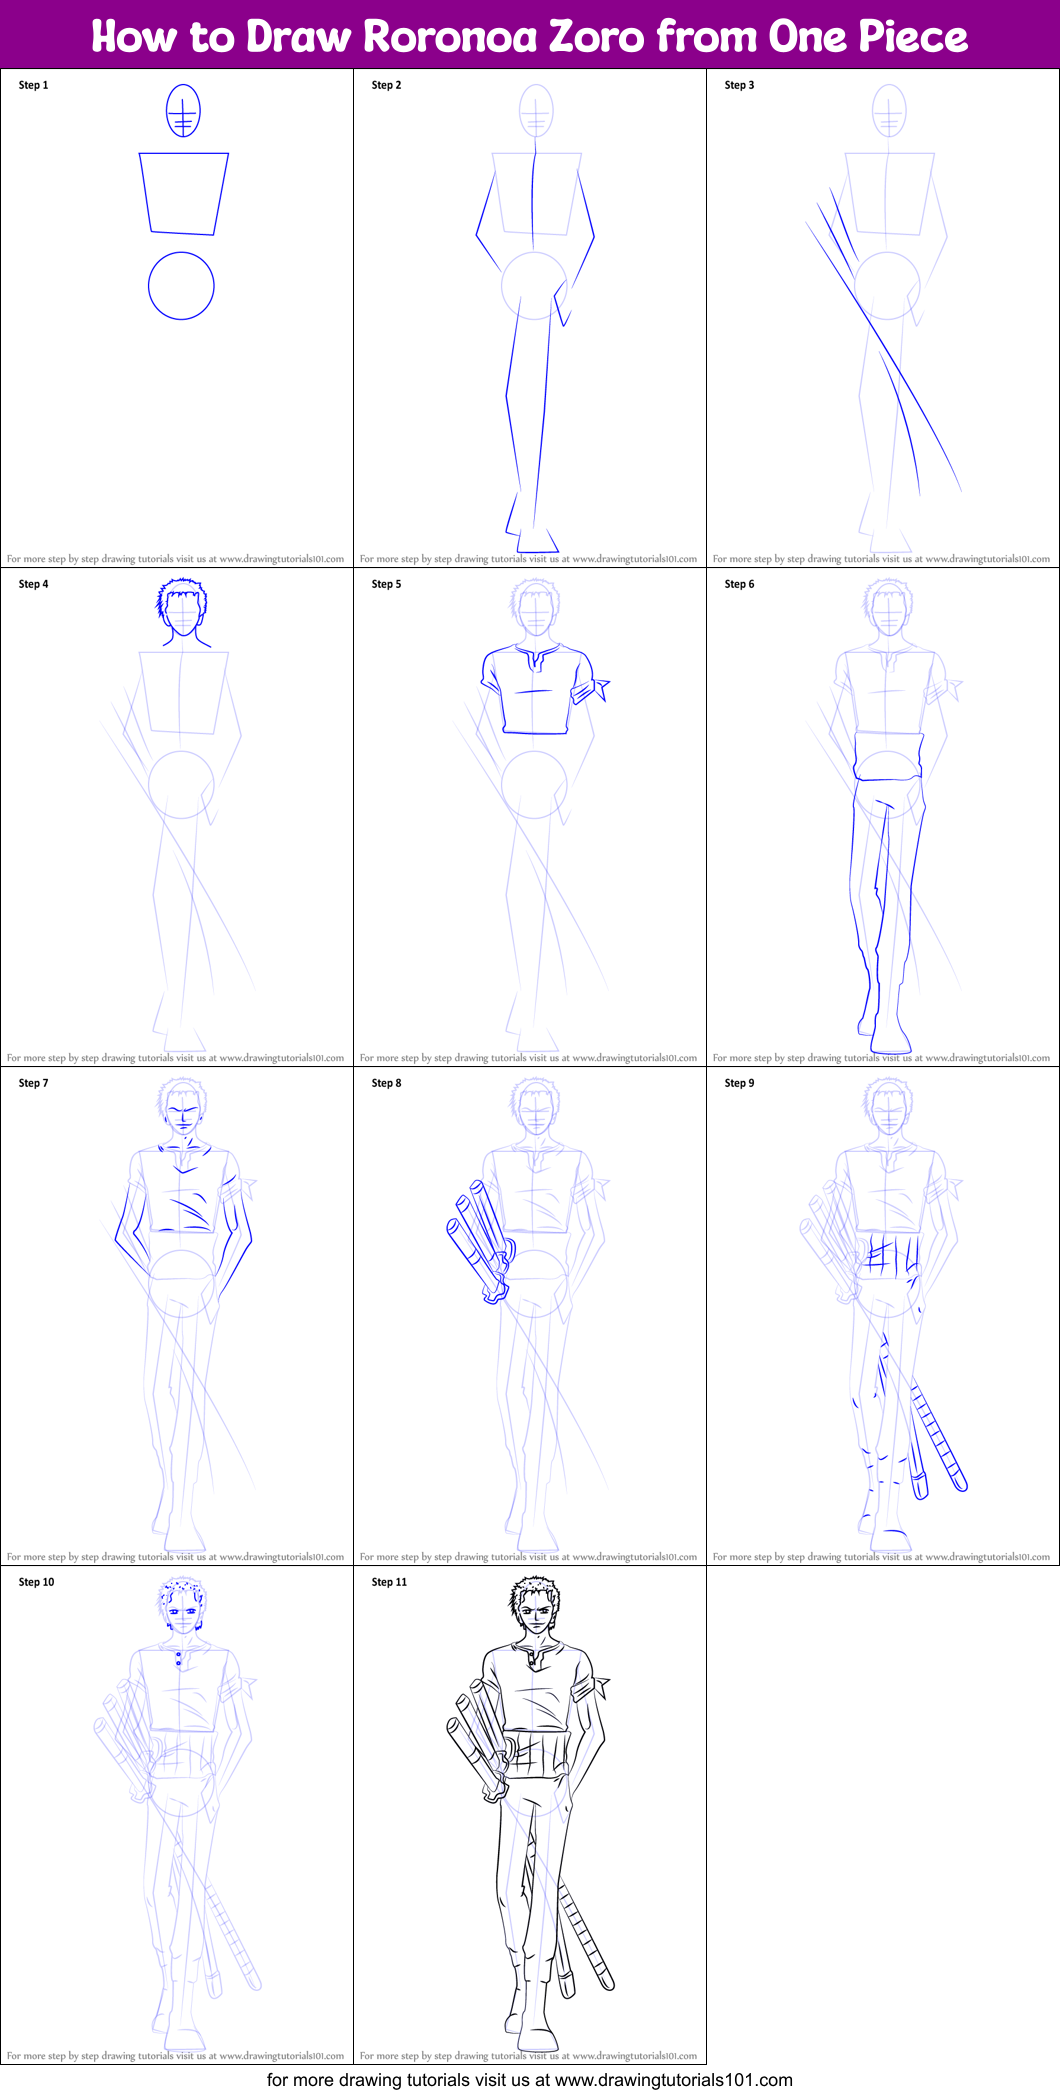 How To Draw Roronoa Zoro From One Piece Printable Step By Step Drawing Sheet Drawingtutorials101 Com